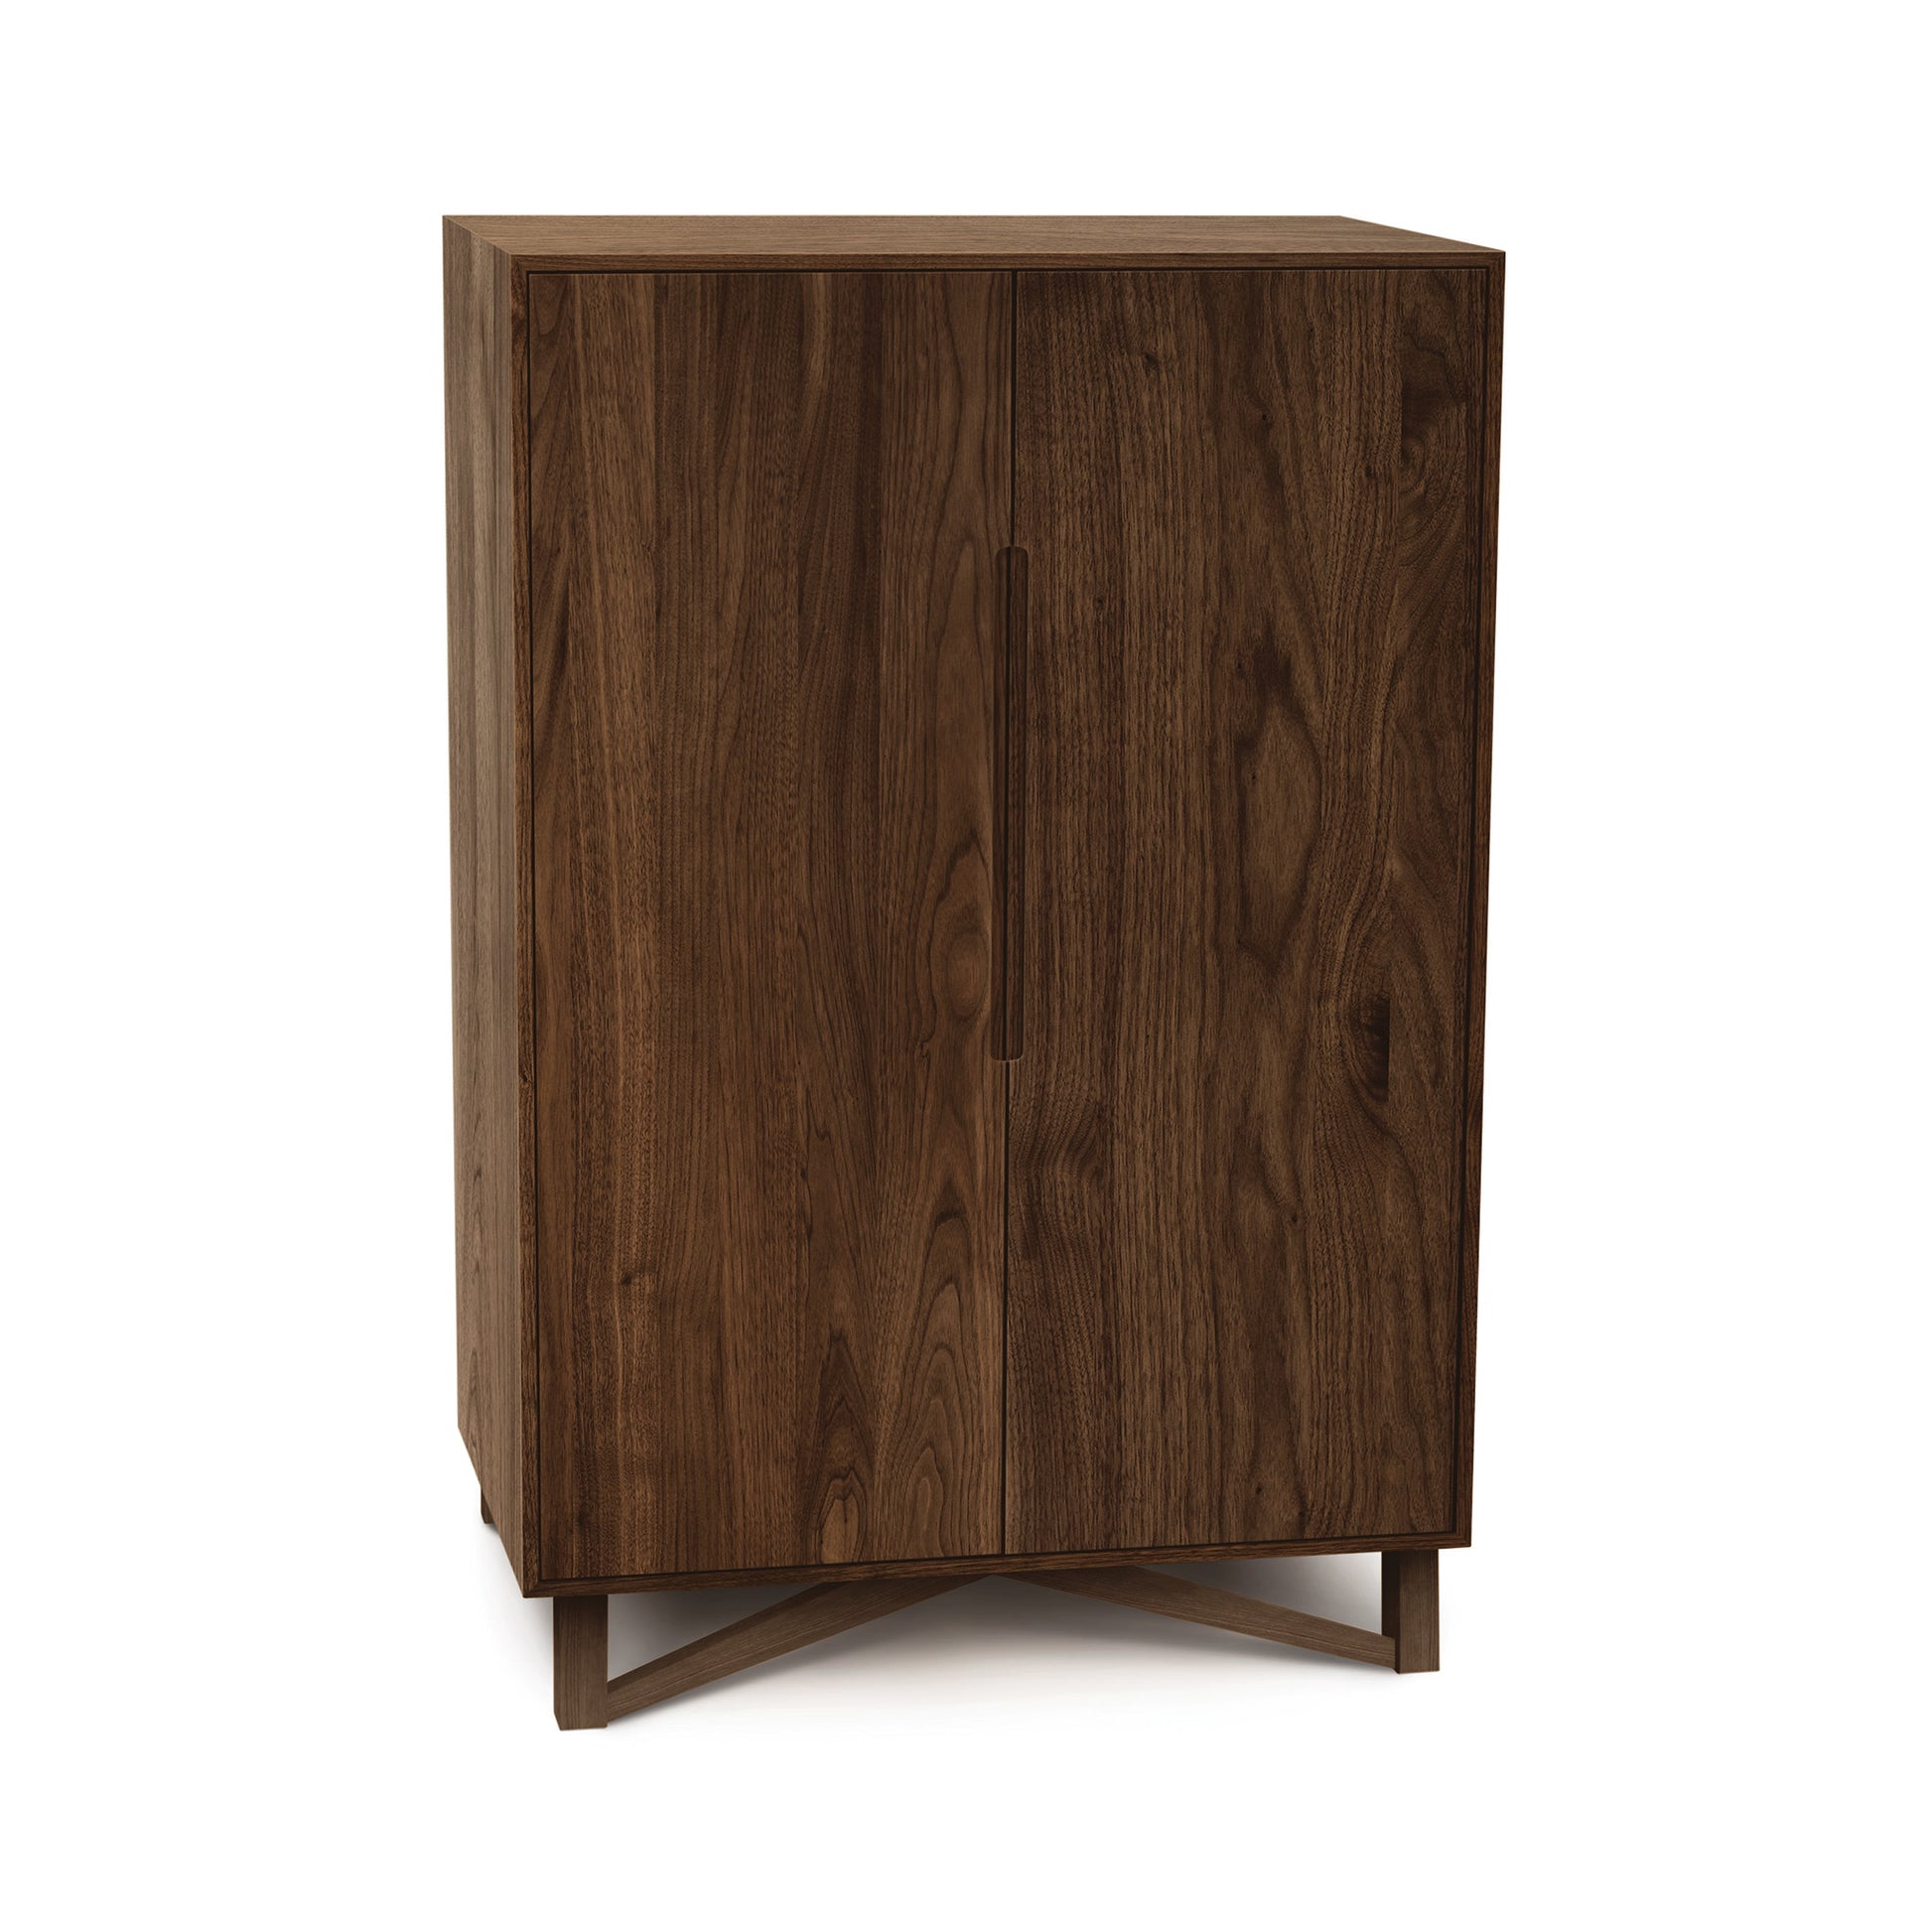 A solid hardwoods Copeland Furniture Exeter Bar Cabinet with two doors, set against a white background.